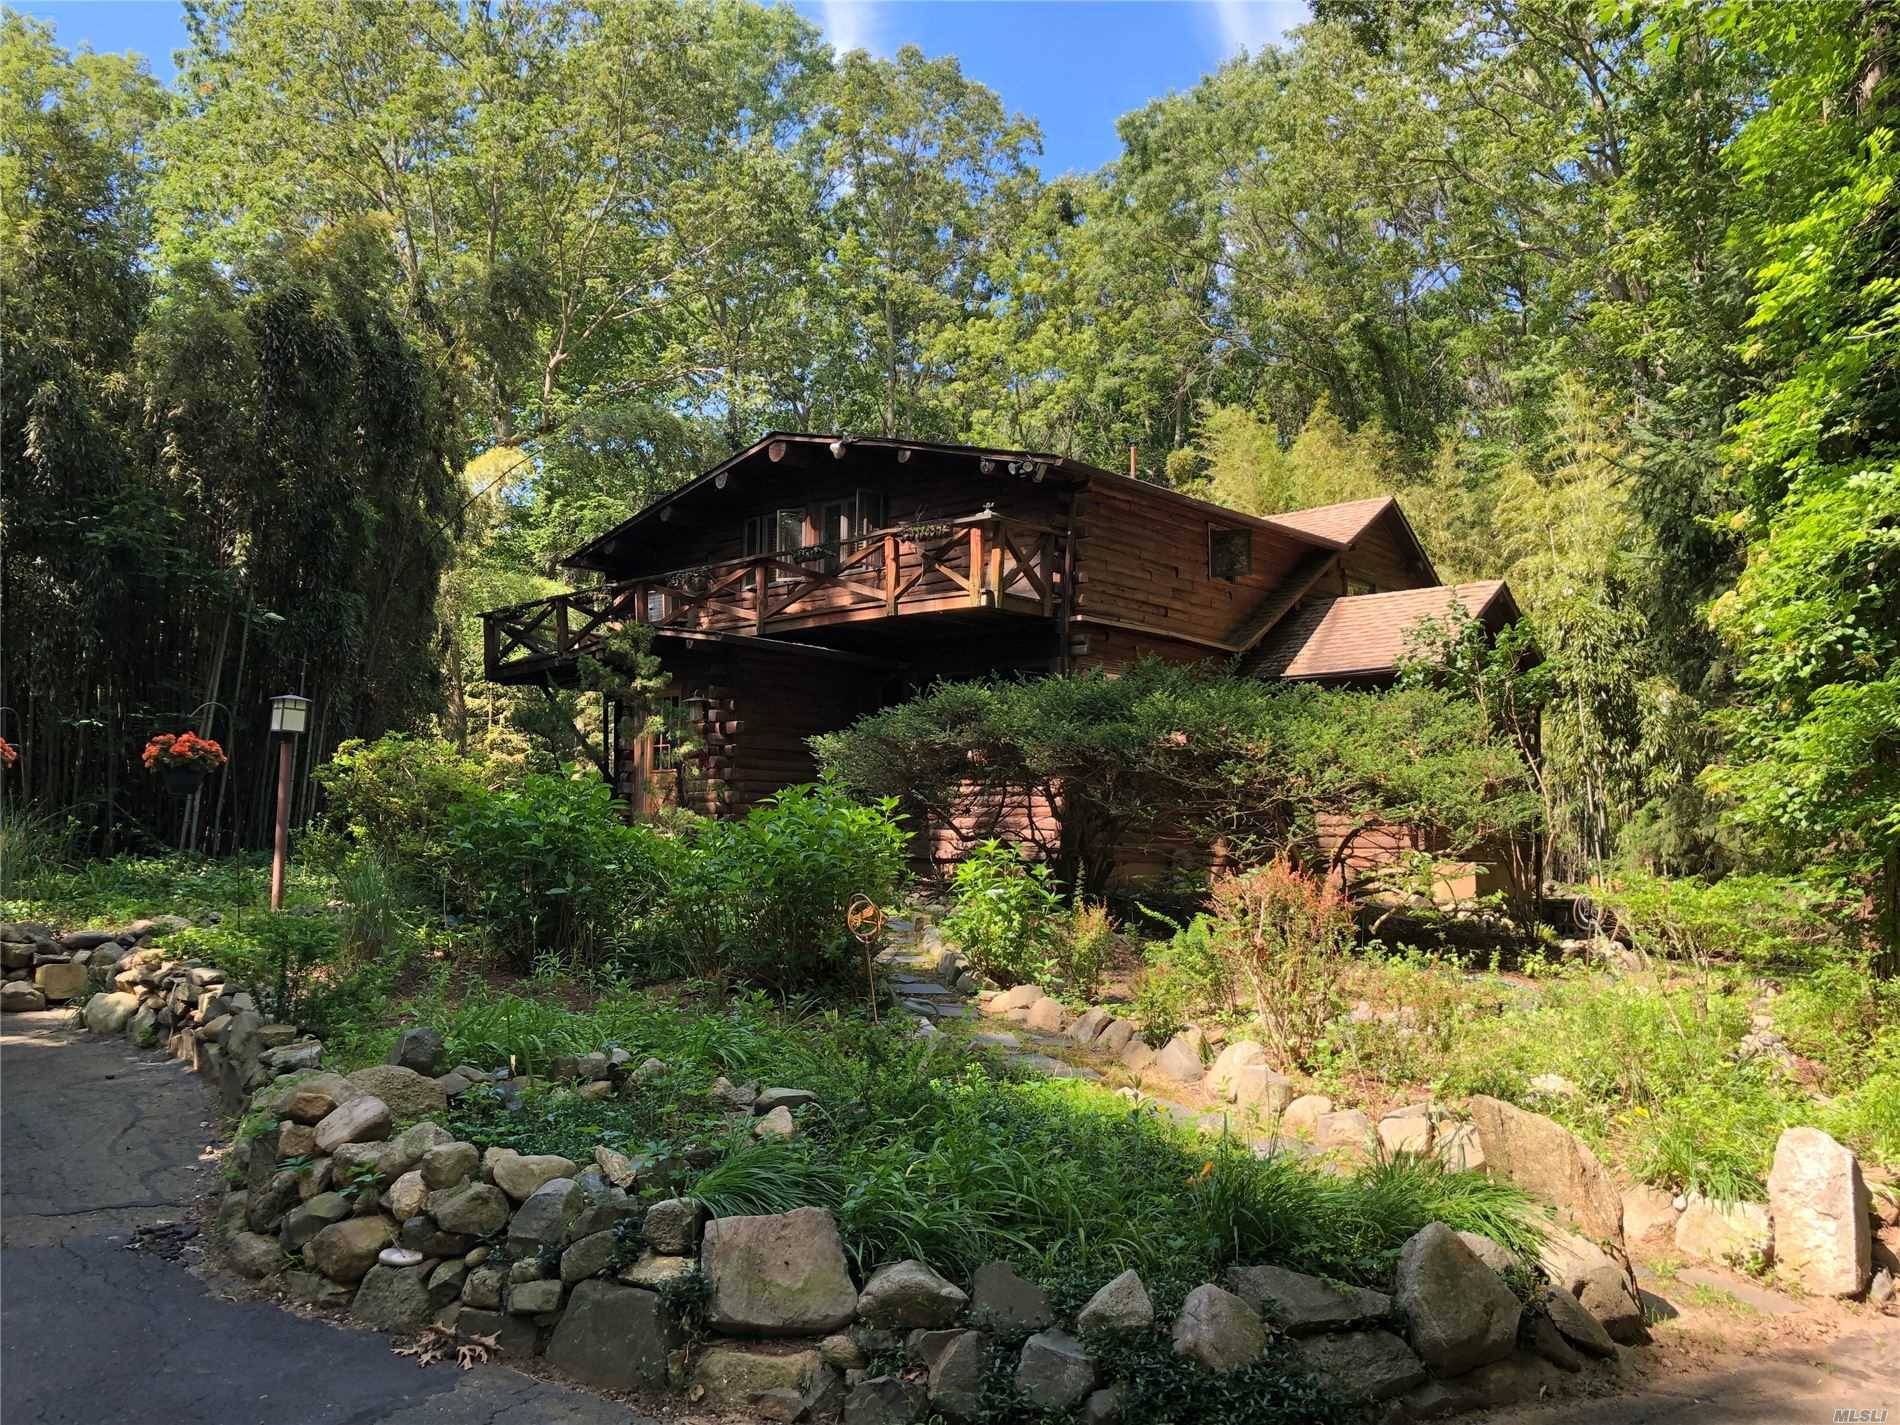 Charming Pvt Log Cabin in Picturesque Serene Lloyd Neck Estates, Short walk to deeded Beach or Park, Mooring and Dock Assoc.